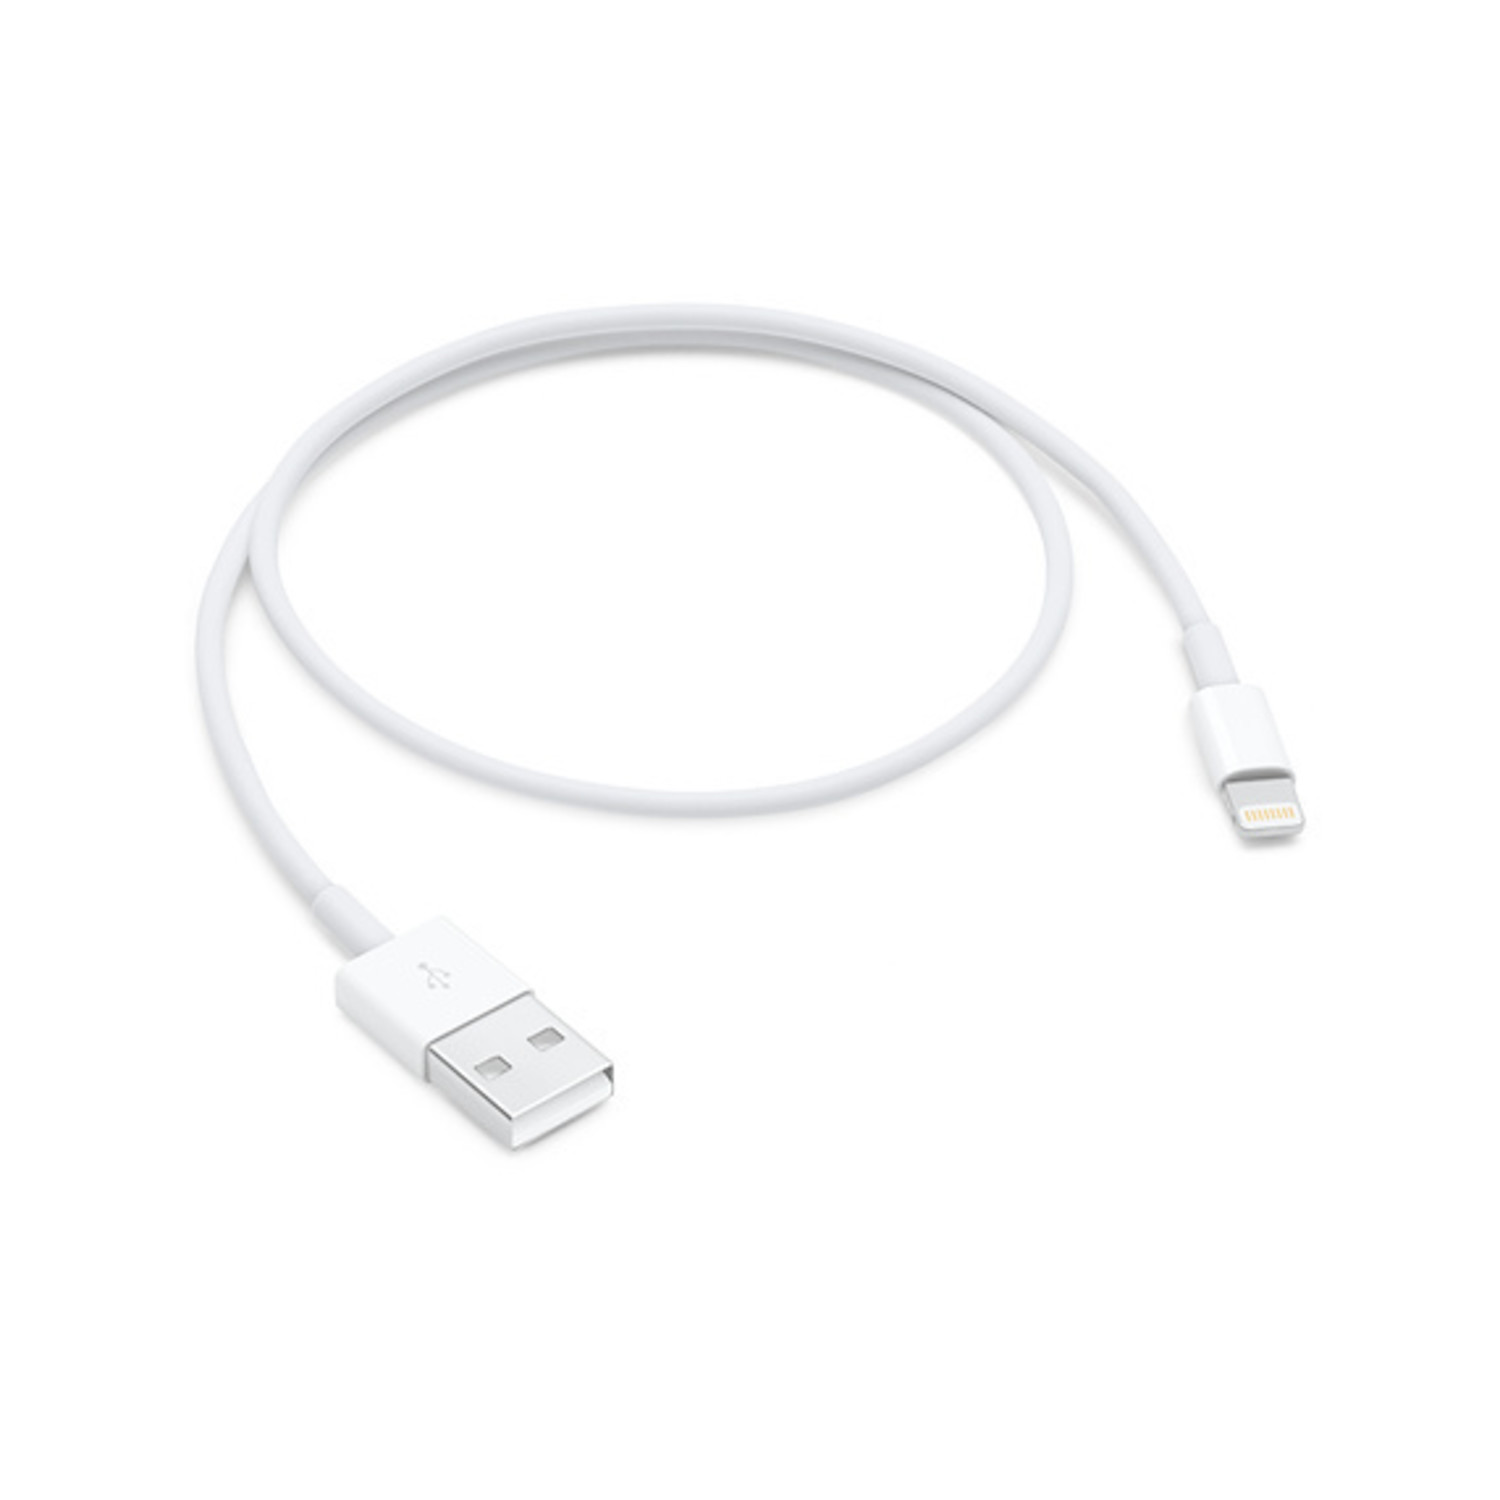 Cable Lightning Oem vers USB - Cables - The Repair Academy Store